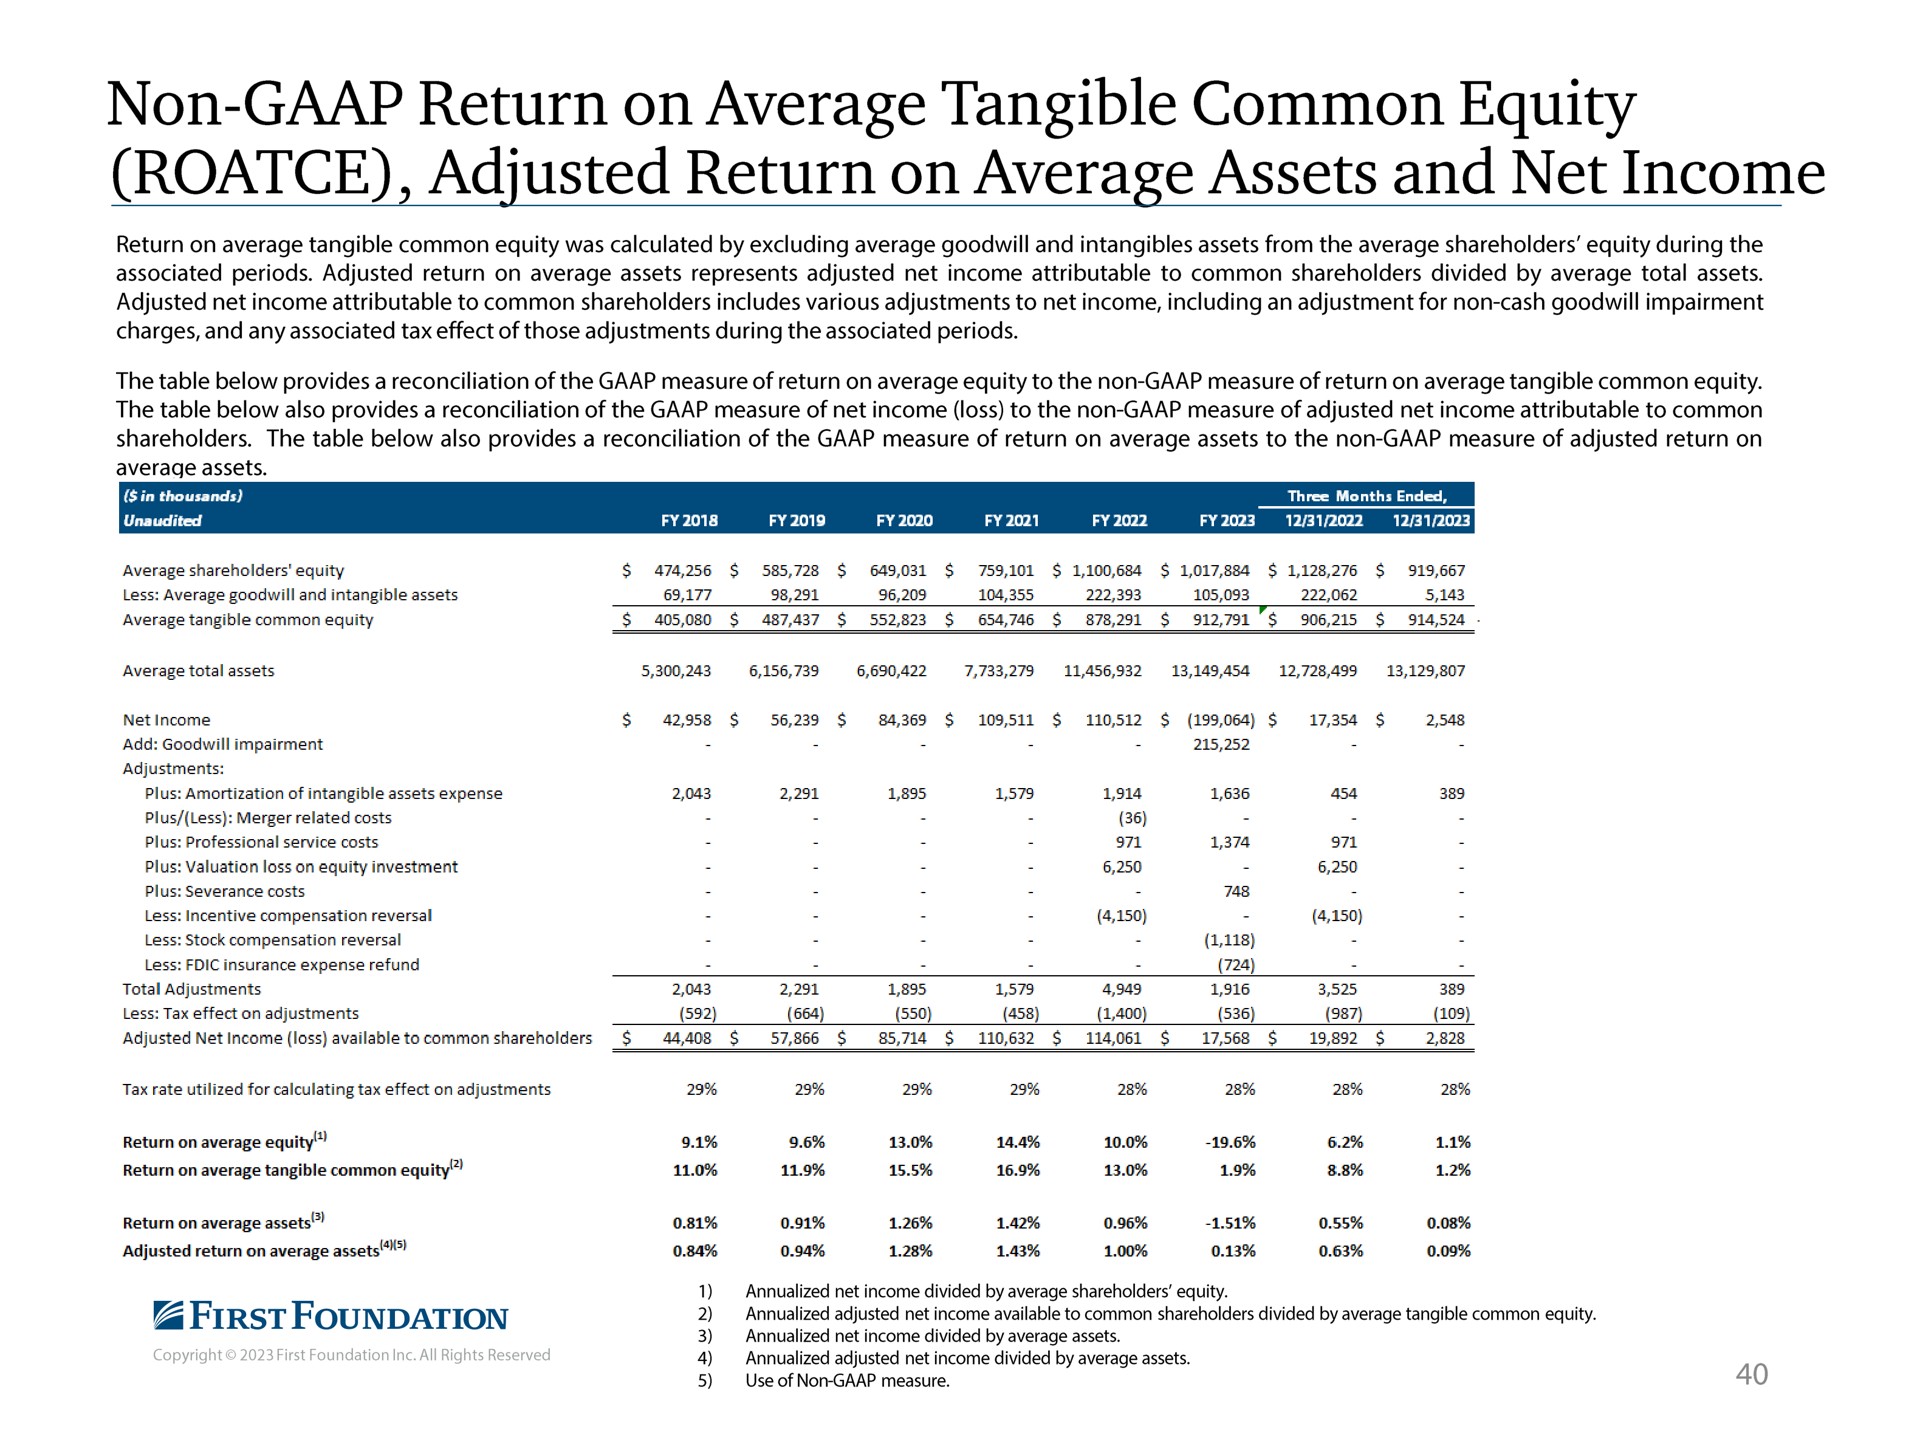 non return on average tangible common equity adjusted return on average assets and net income | First Foundation